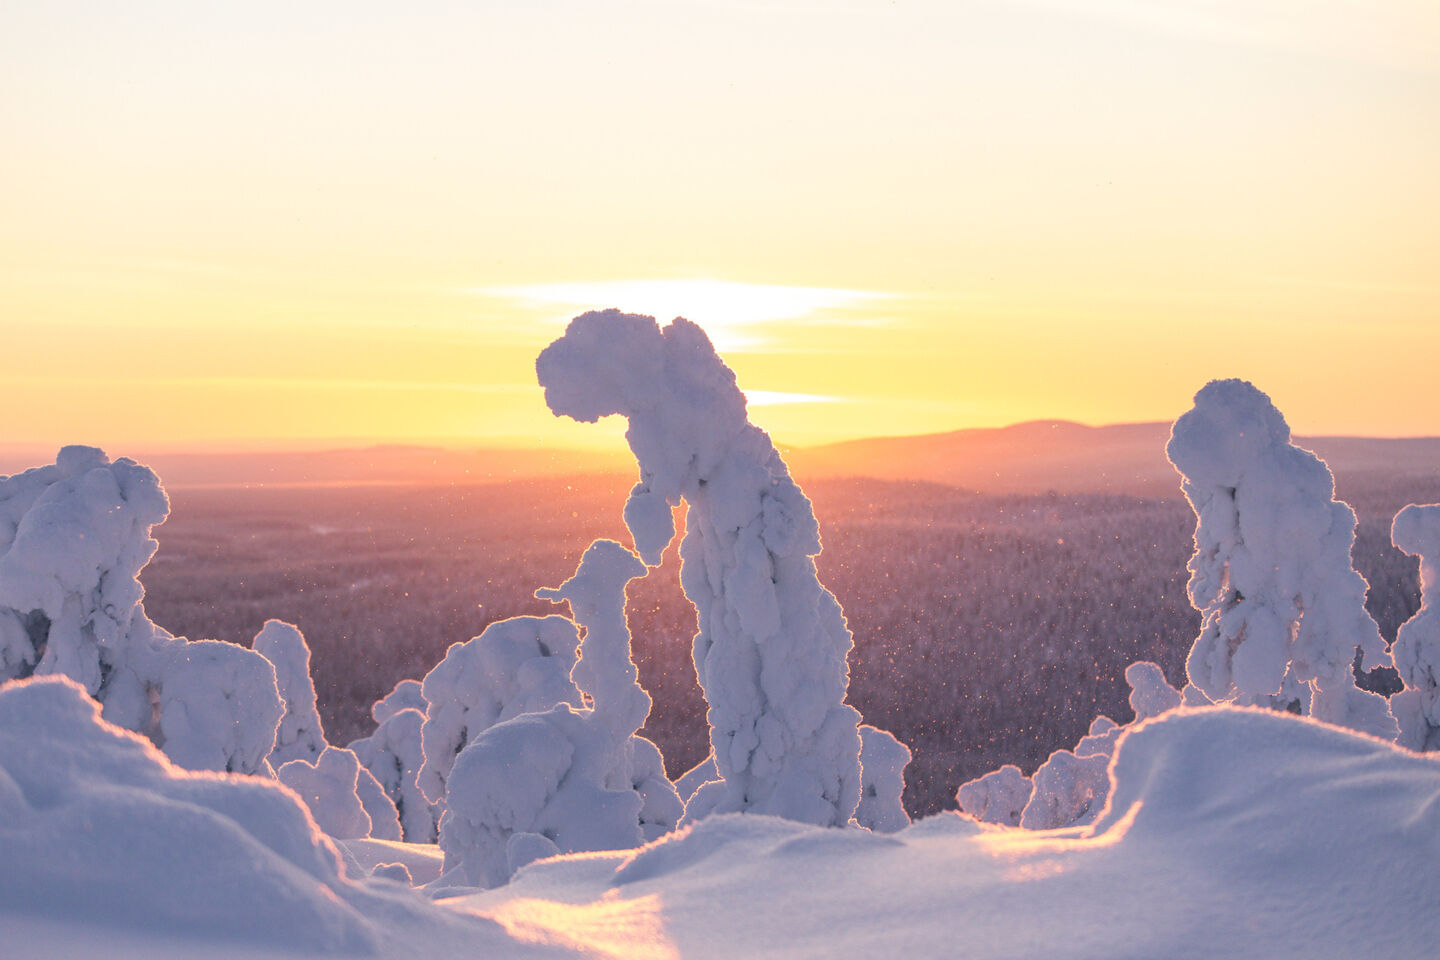 A sunset over a snowy landscape in Salla, Finland